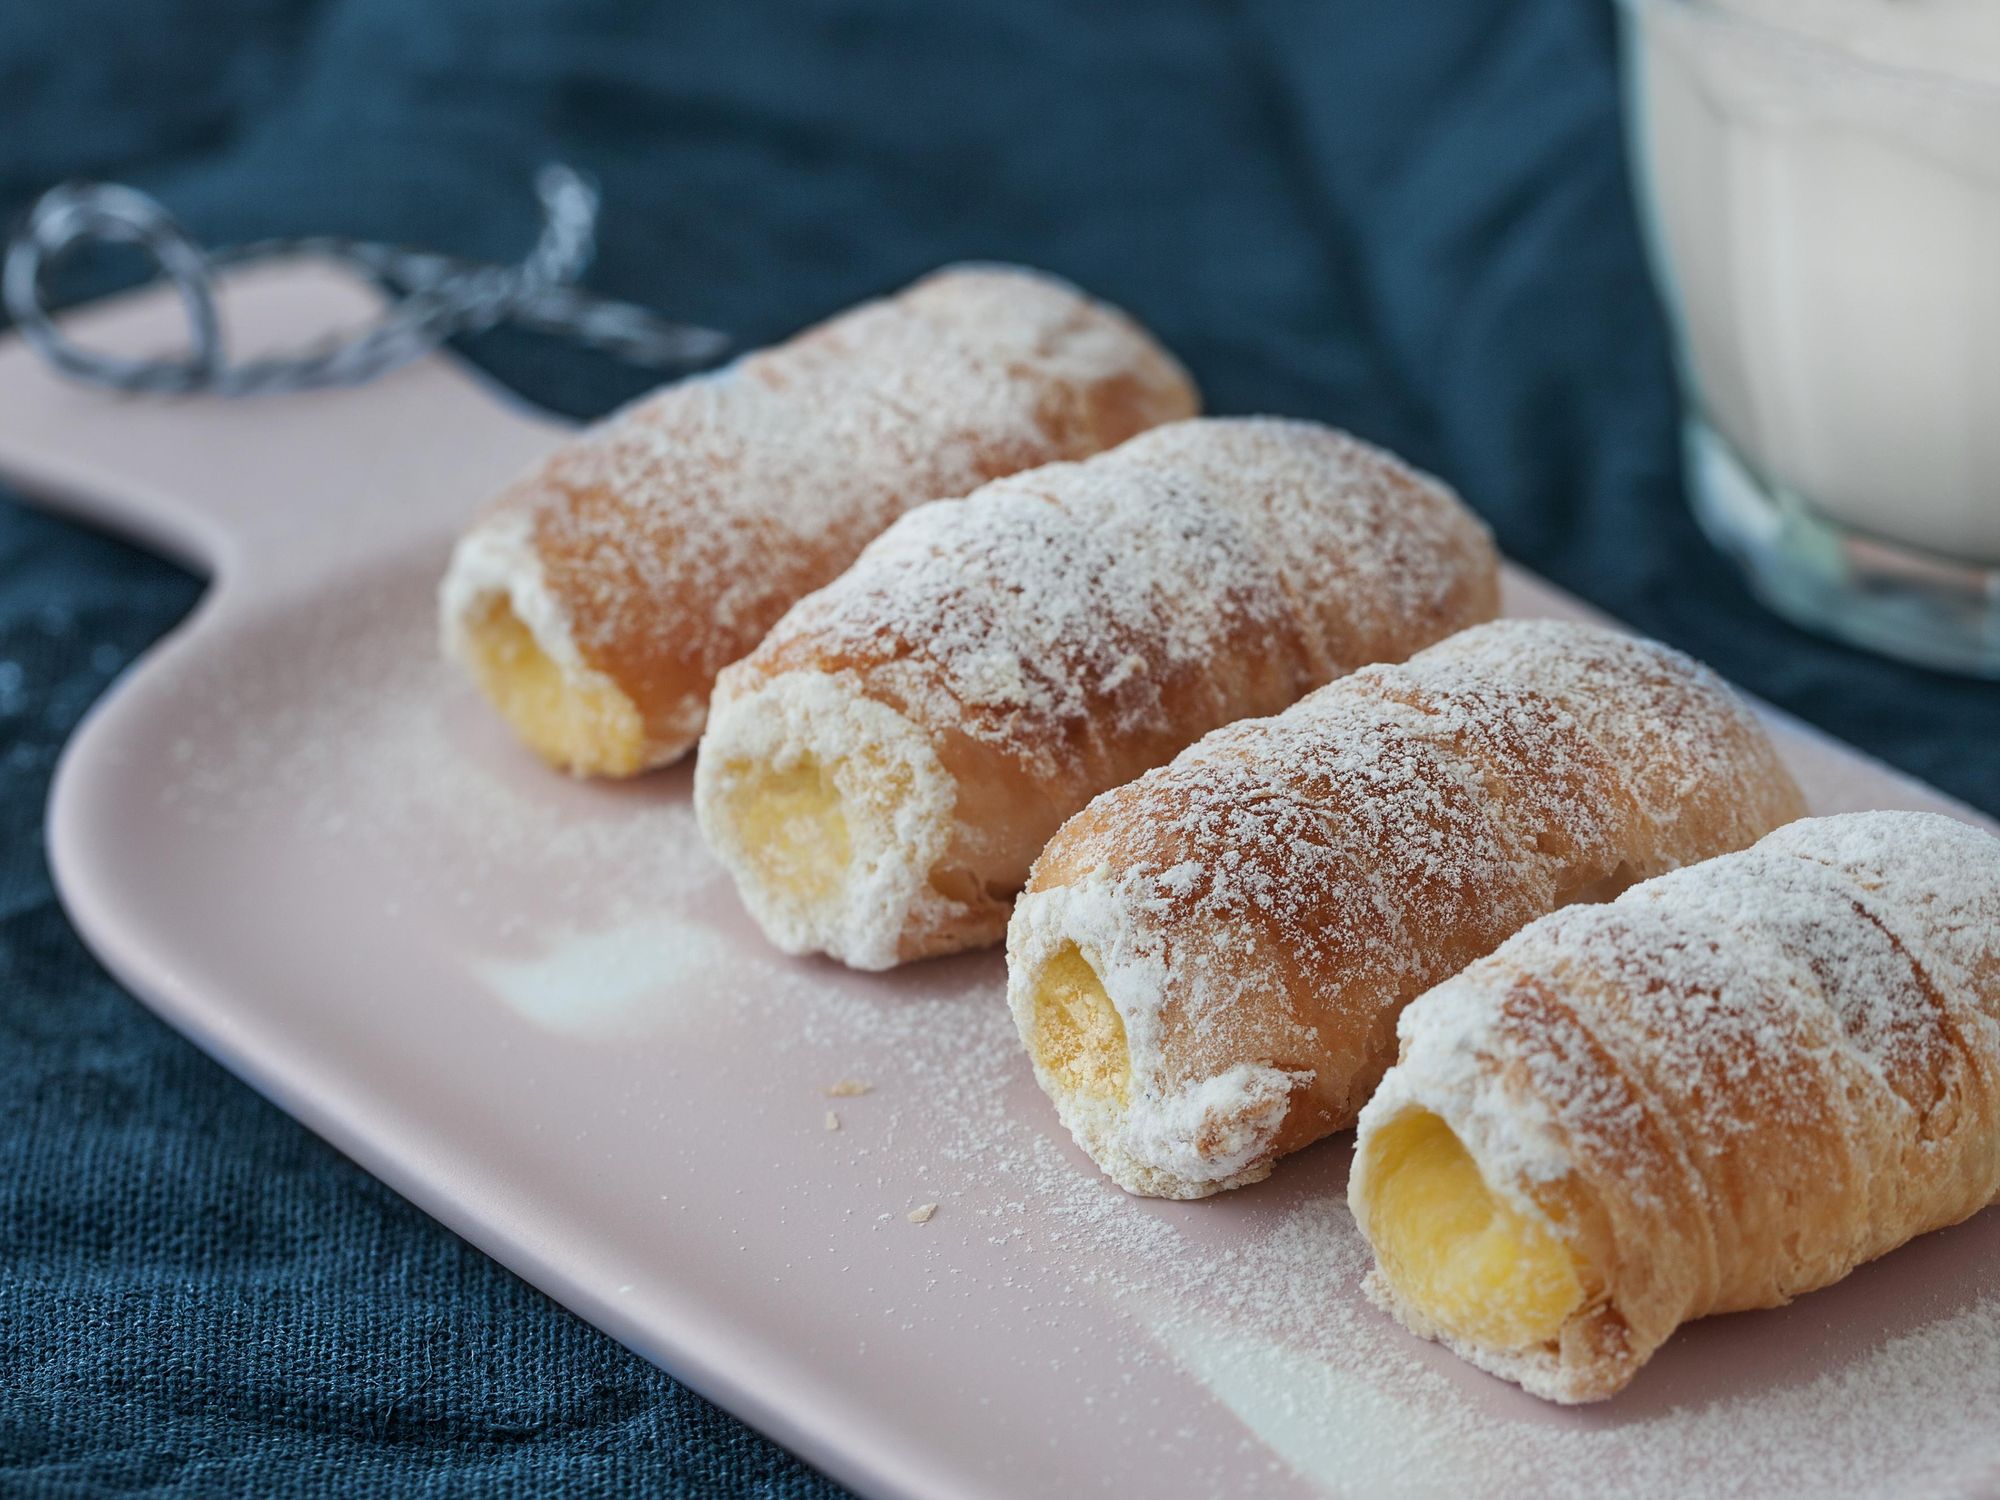 Cannons with pastry cream